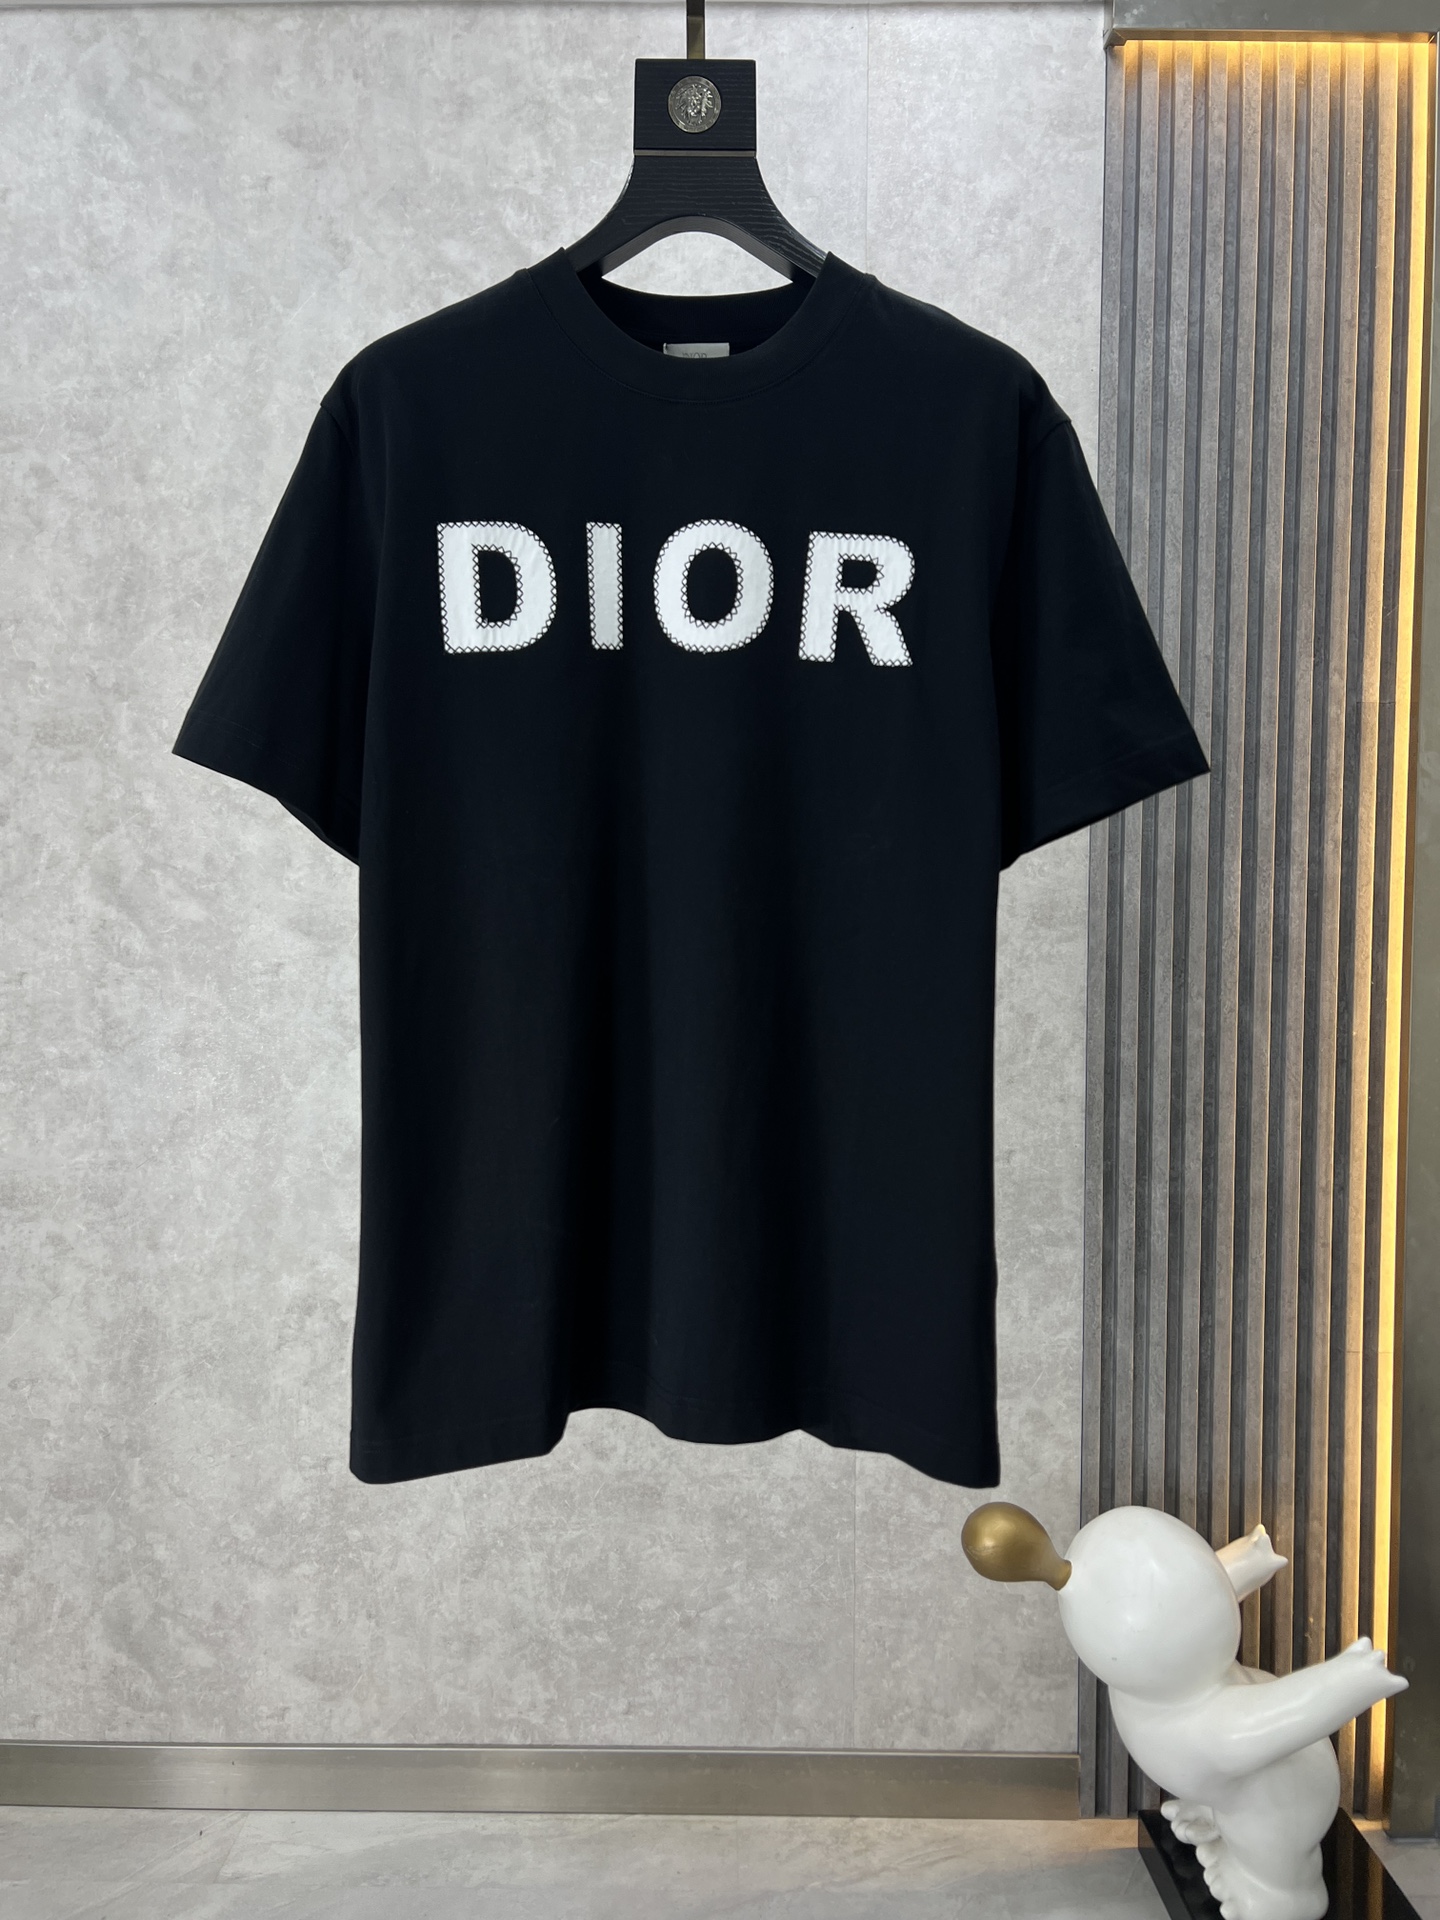 Dior Flawless
 Clothing T-Shirt Black Khaki White Unisex Cotton Spring/Summer Collection Short Sleeve